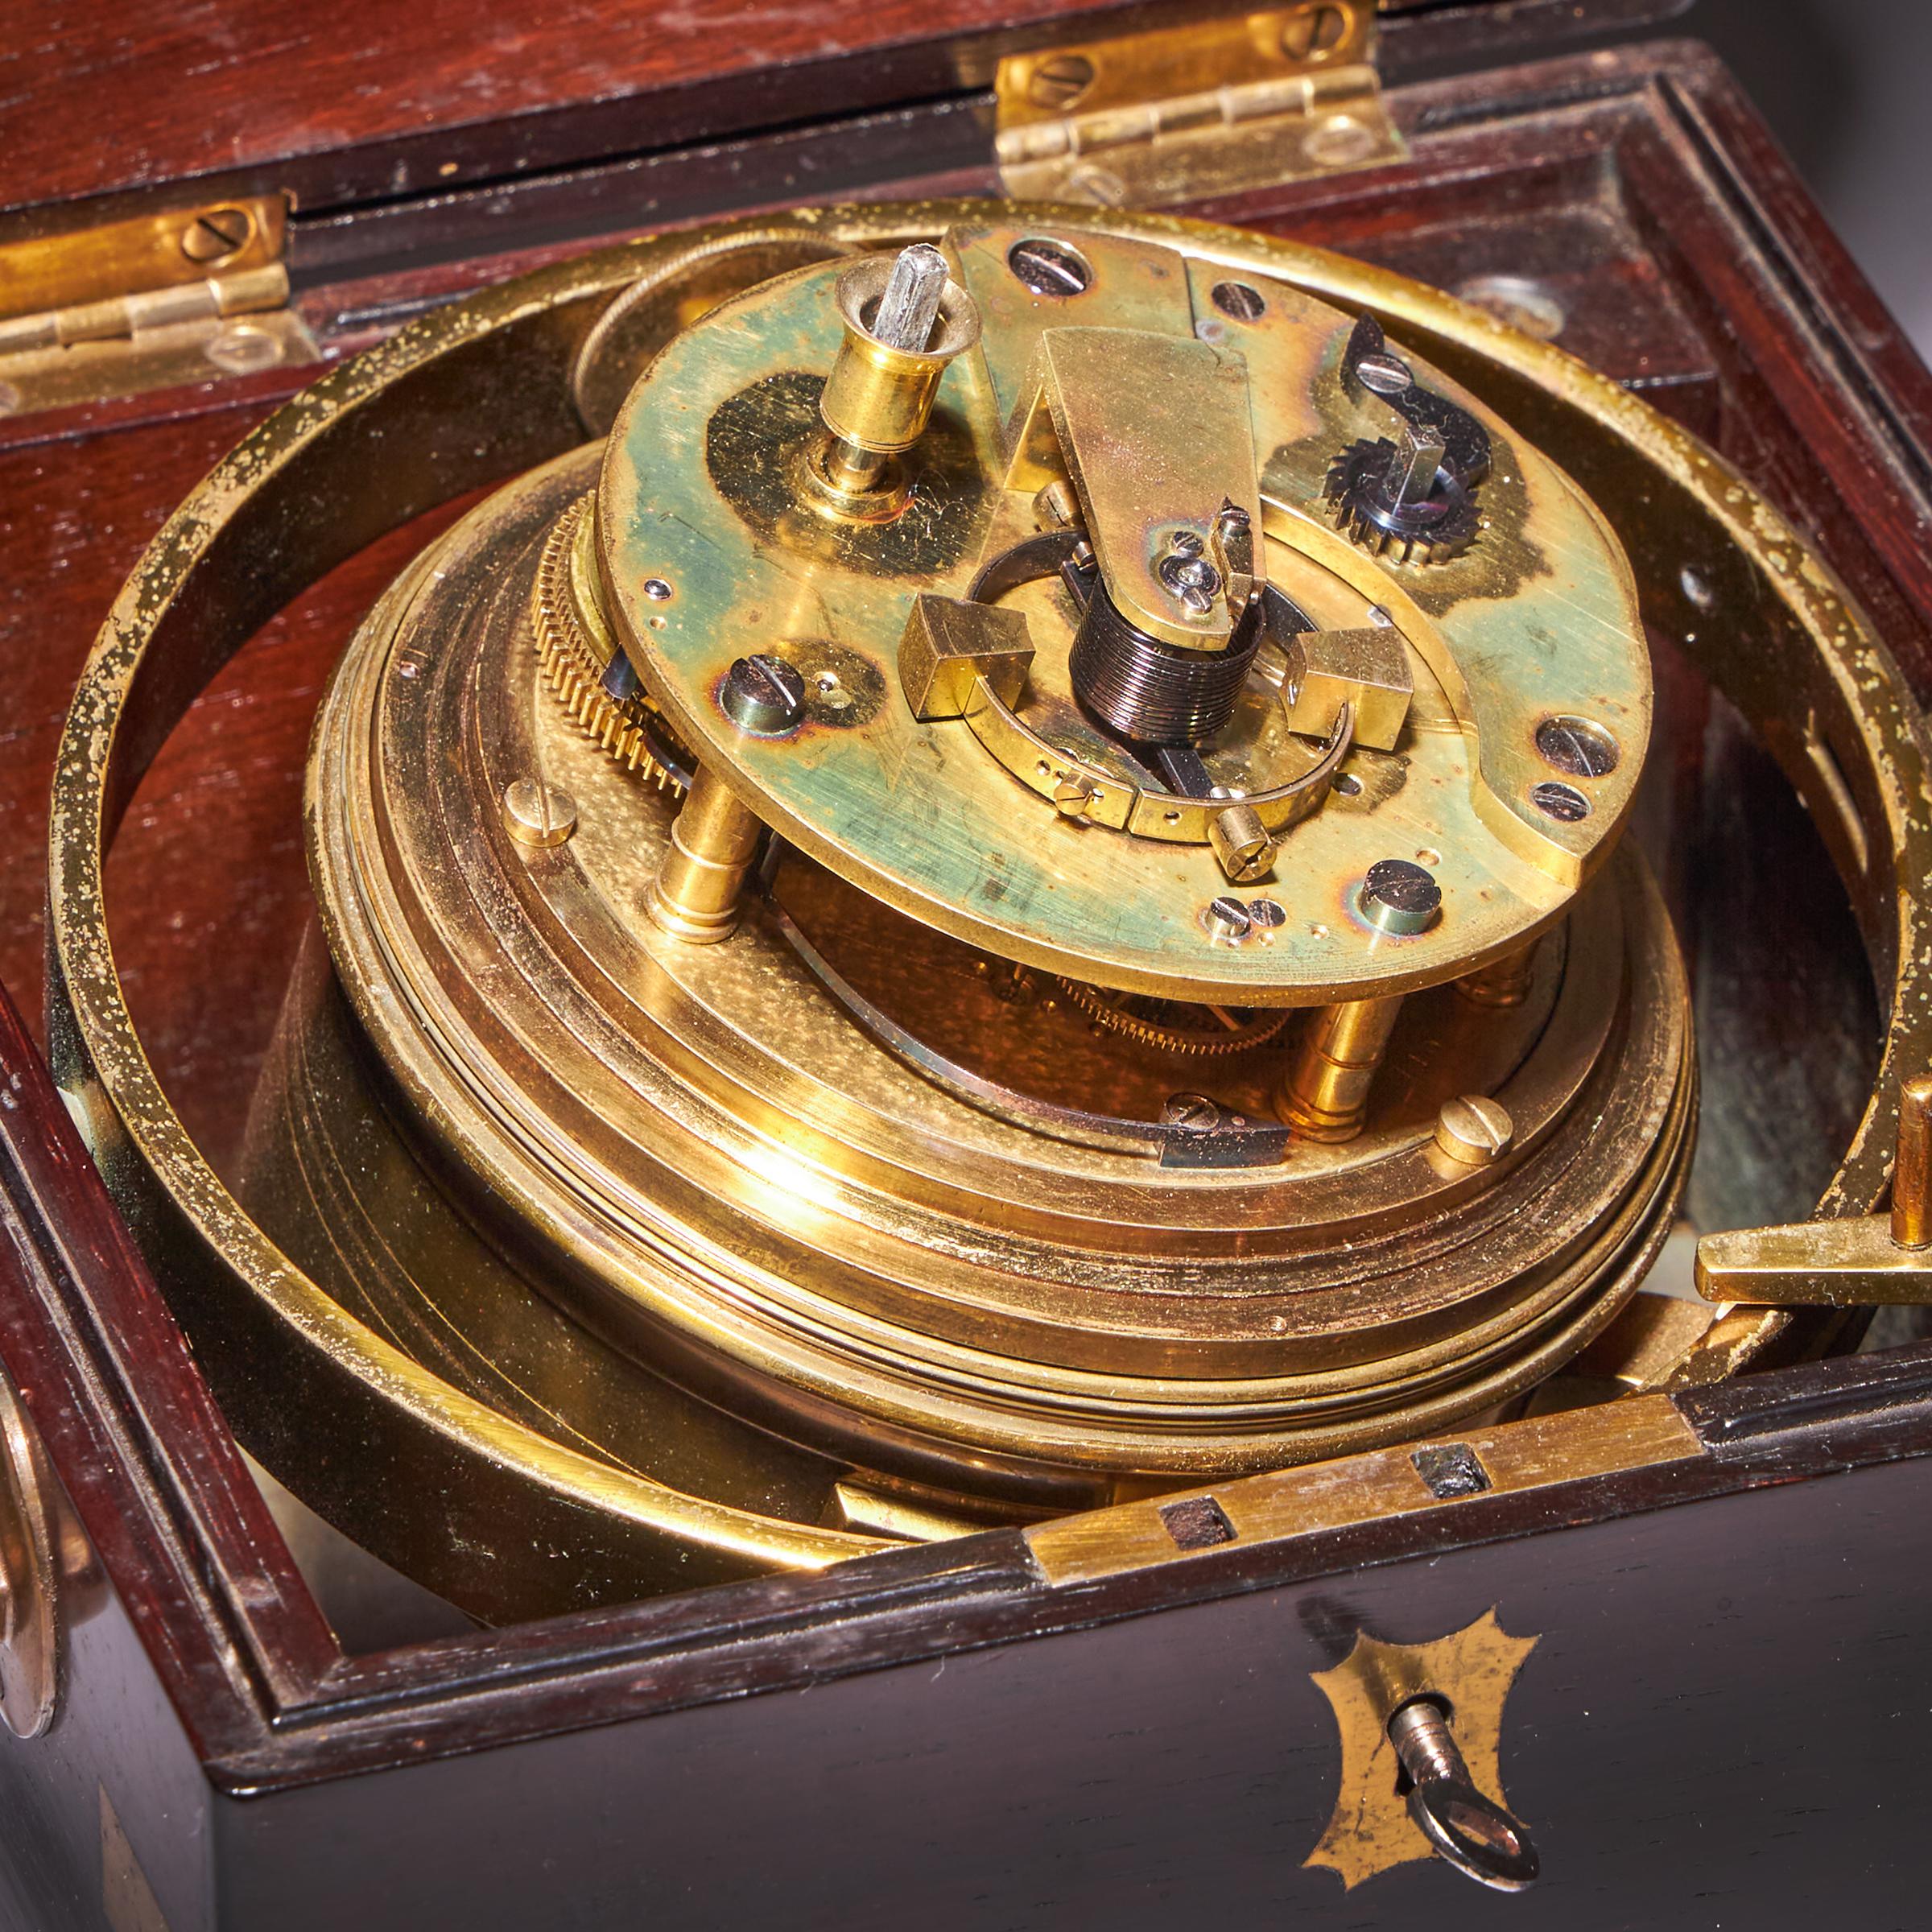 Fine Two-Day Marine Chronometer Signed Charles Frodsham For Sale 1